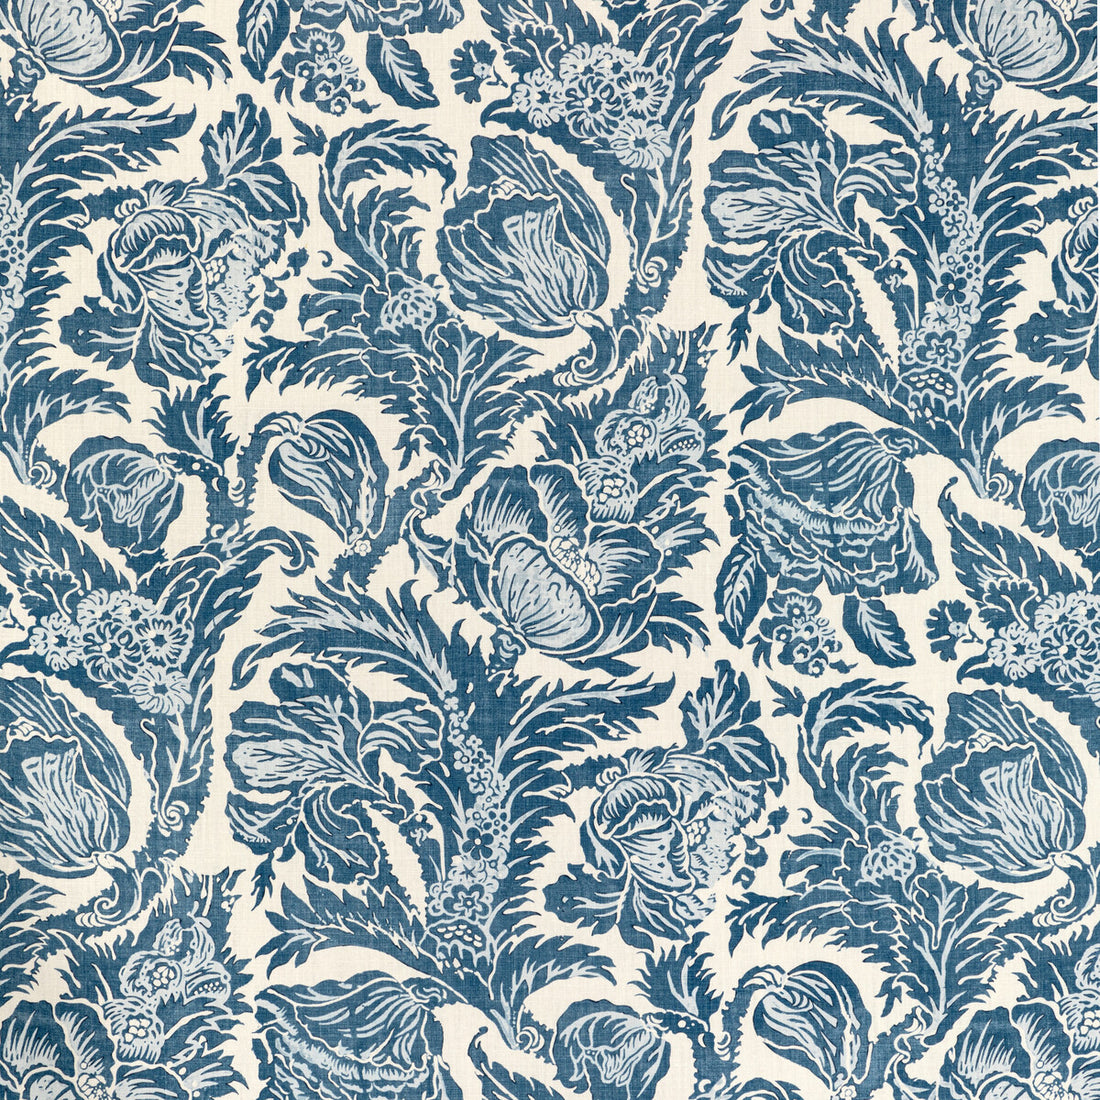 Marion Print fabric in denim color - pattern 2020205.515.0 - by Lee Jofa in the Breckenridge collection